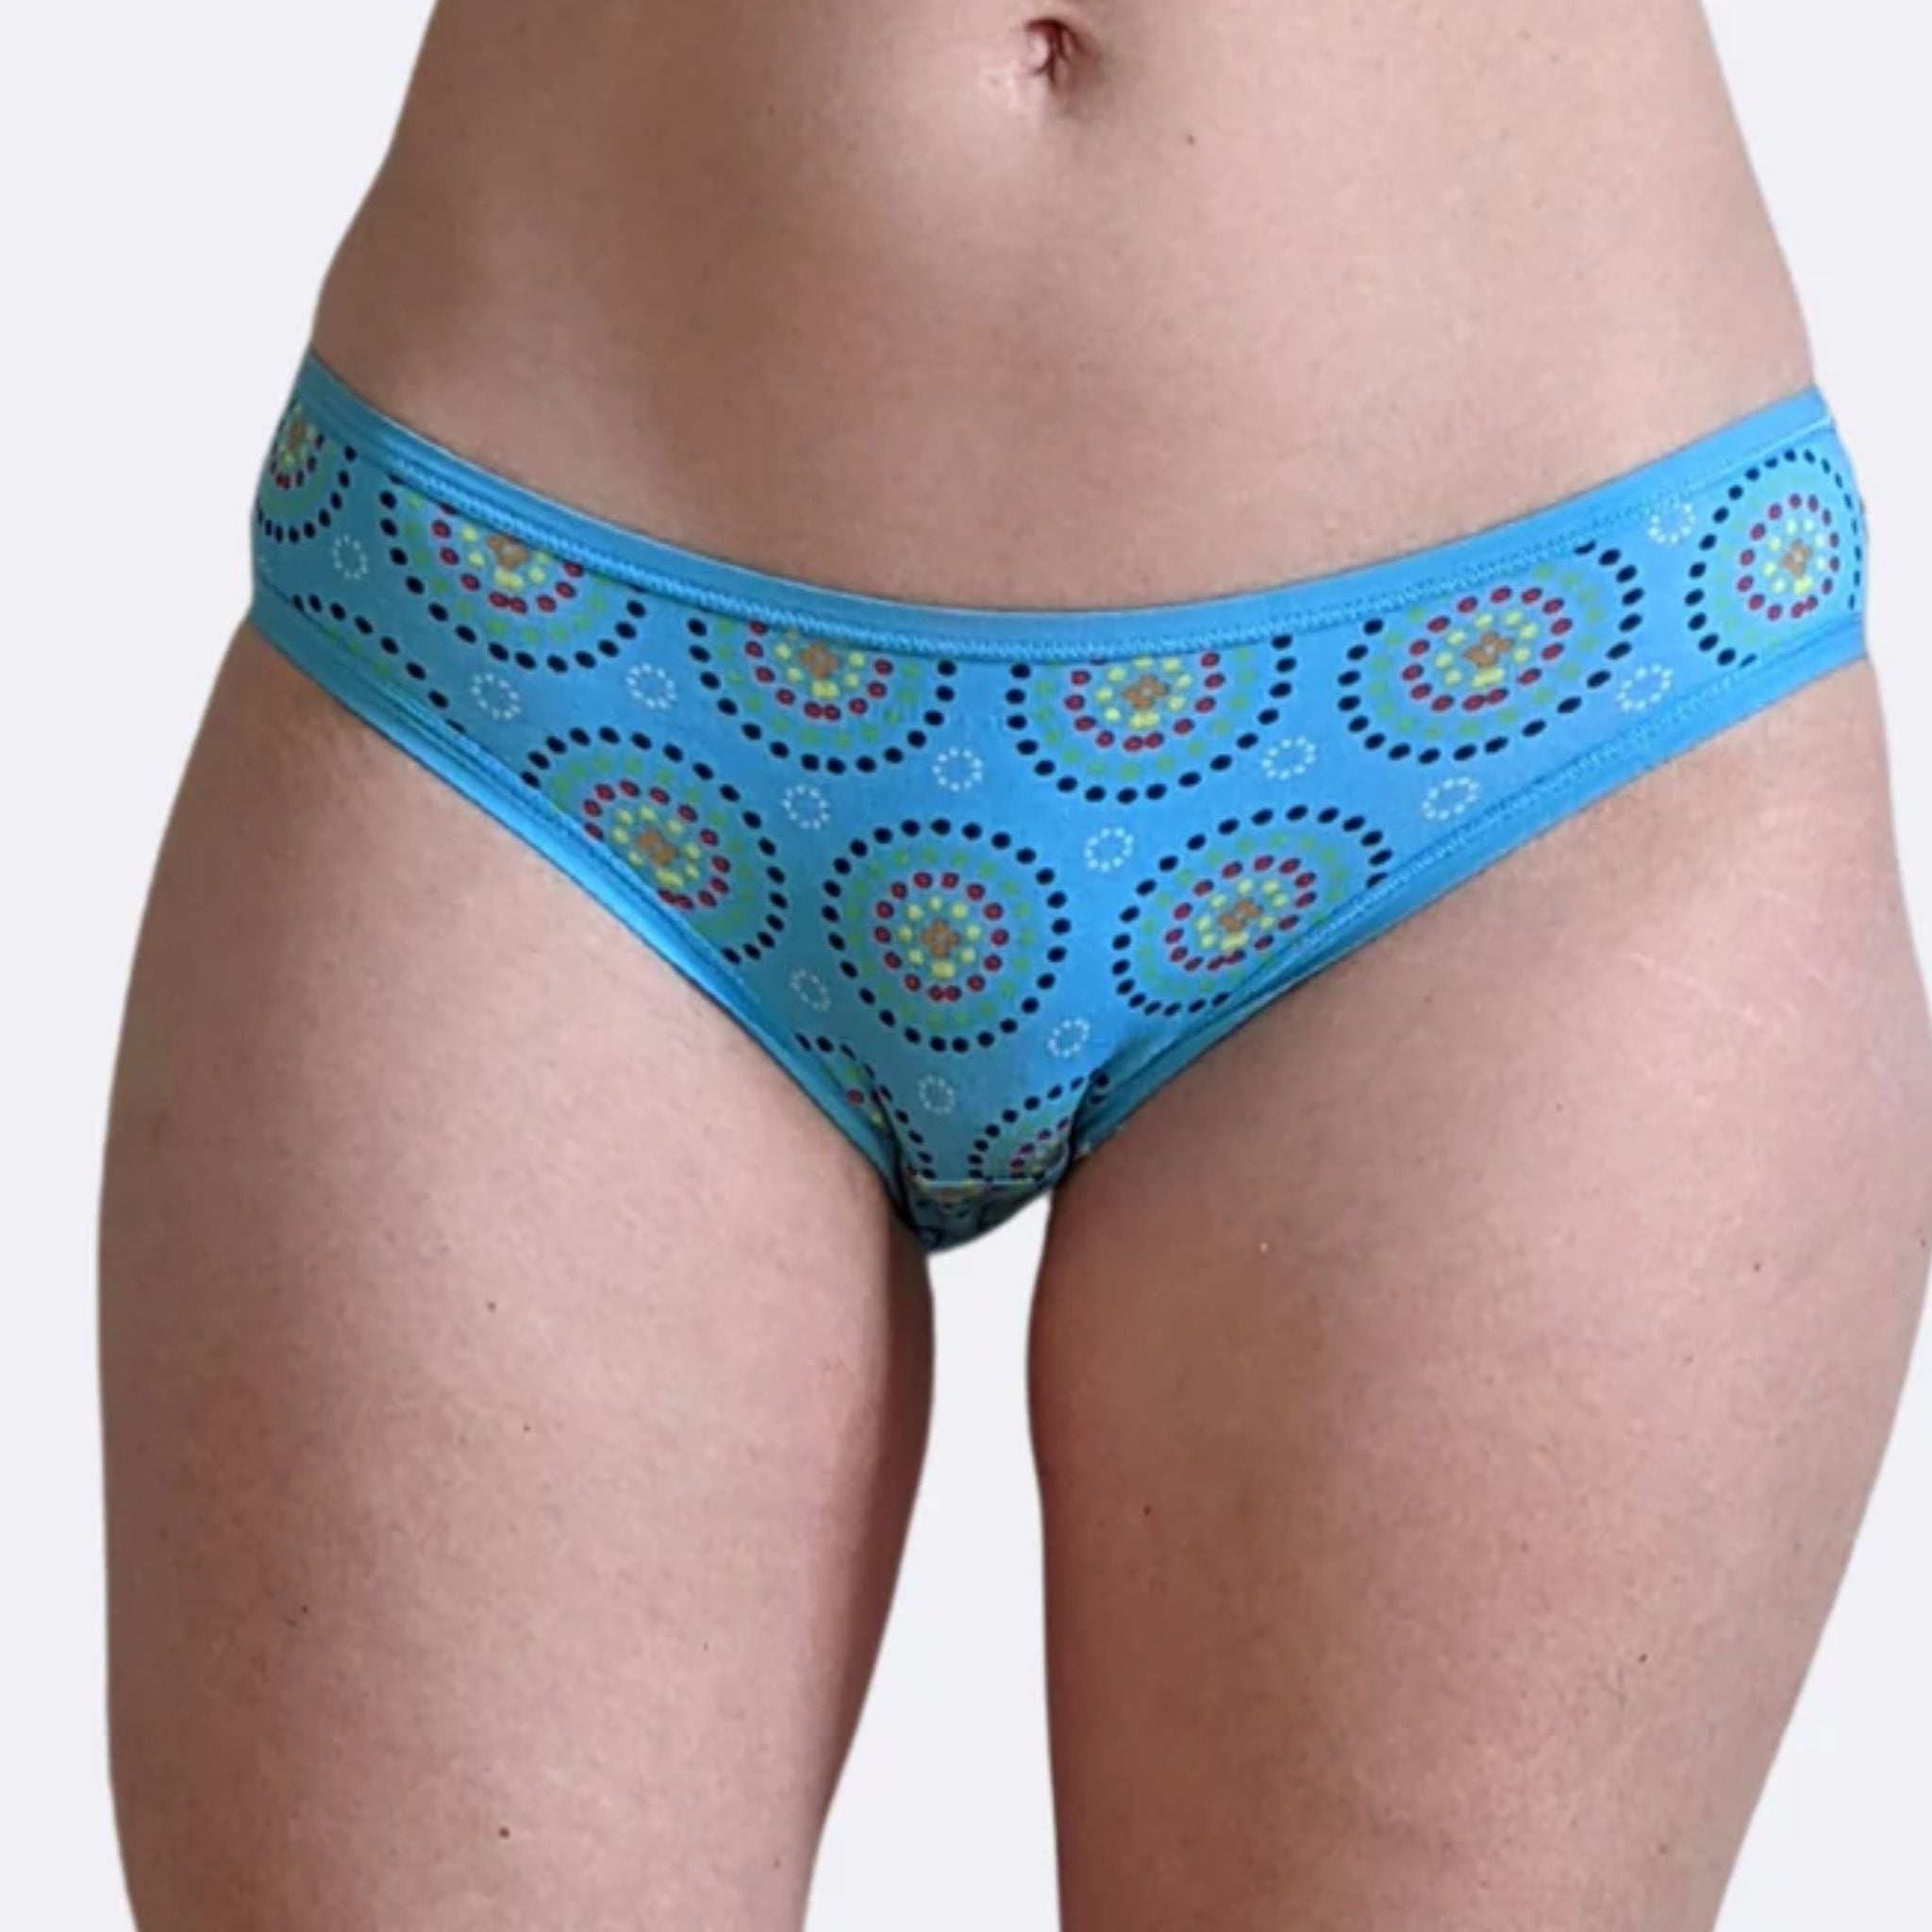 Person wearing blue bikini bottoms with circular patterns, showing the front view